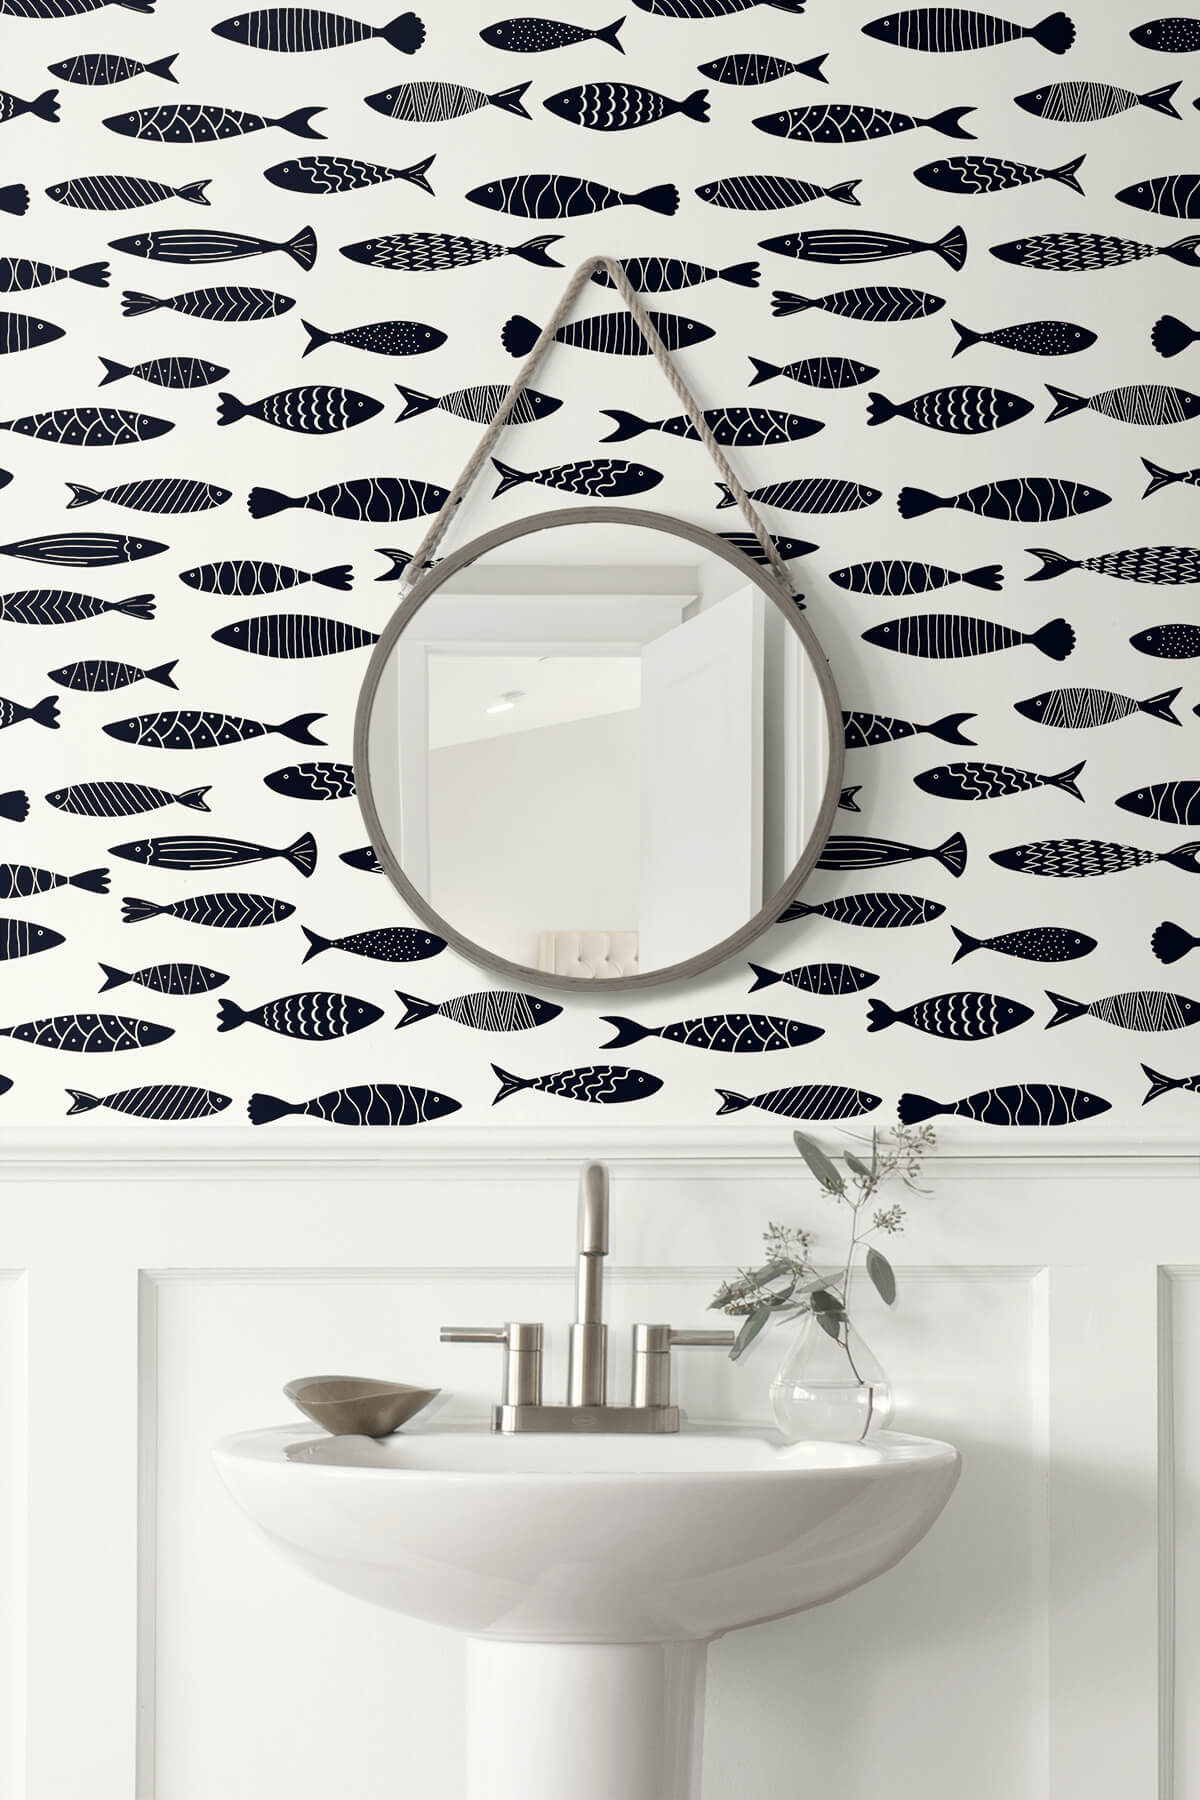 Seabrook Summer House Bay Fish Wallpaper - Black and White